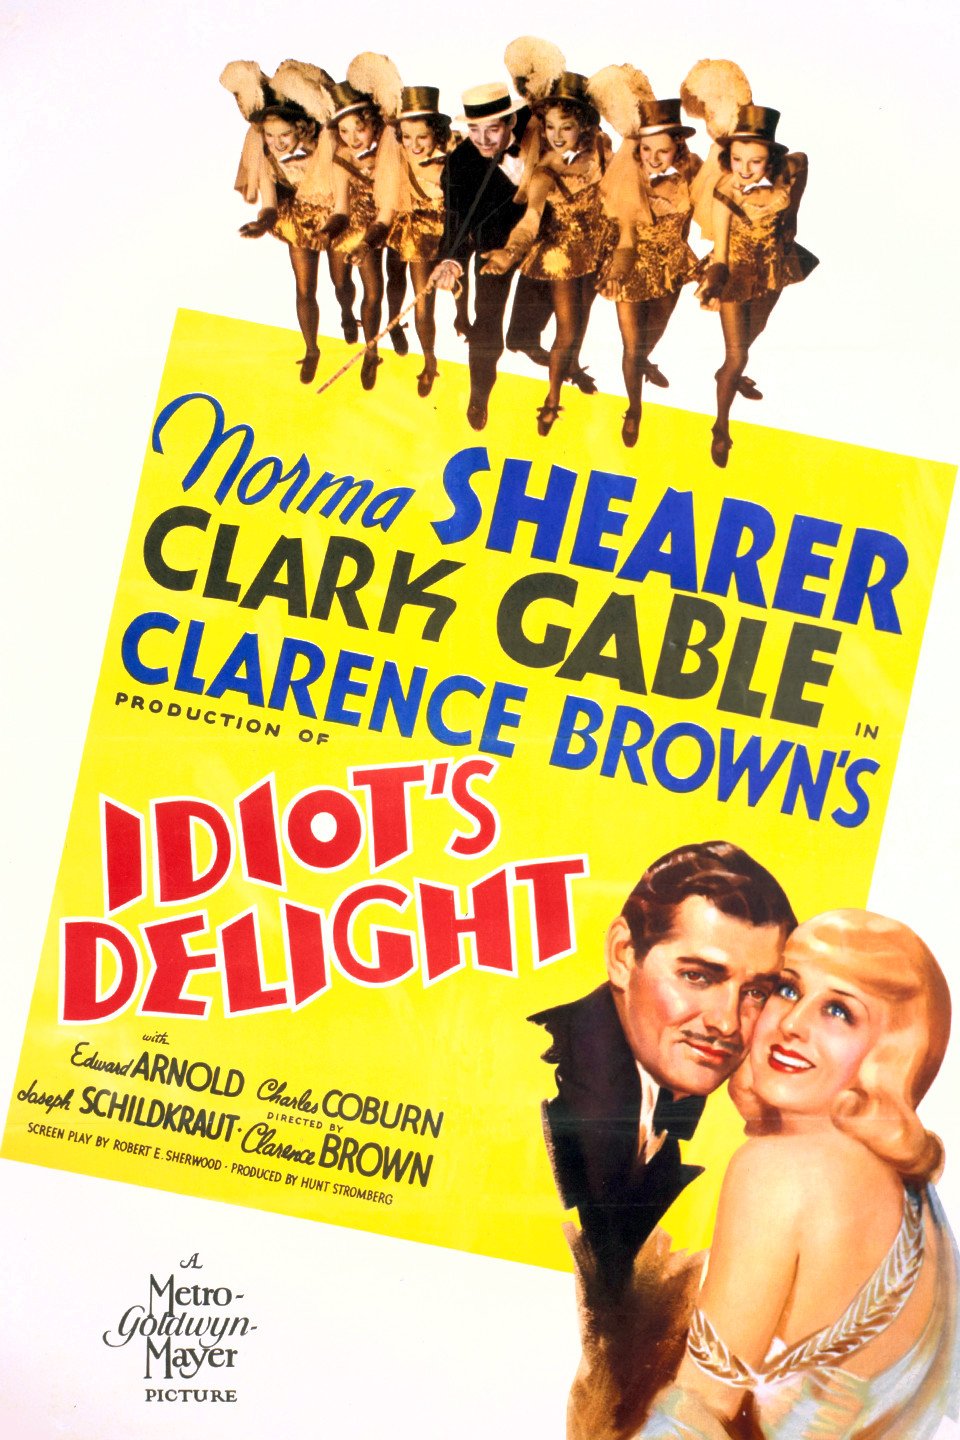 Poster of the movie Idiot's Delight